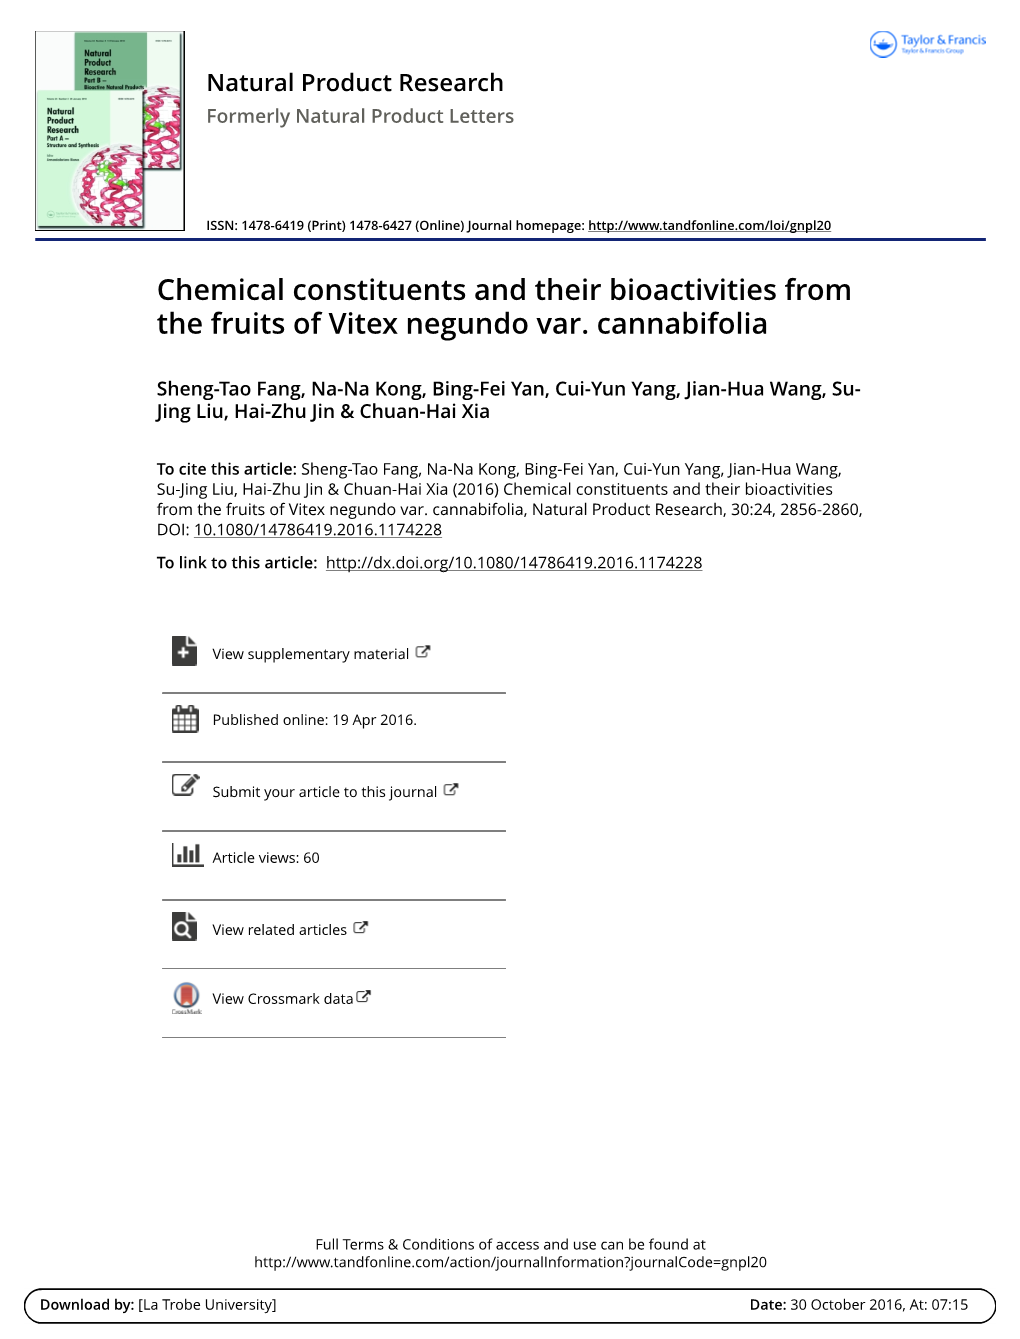 Chemical Constituents and Their Bioactivities from the Fruits of Vitex Negundo Var